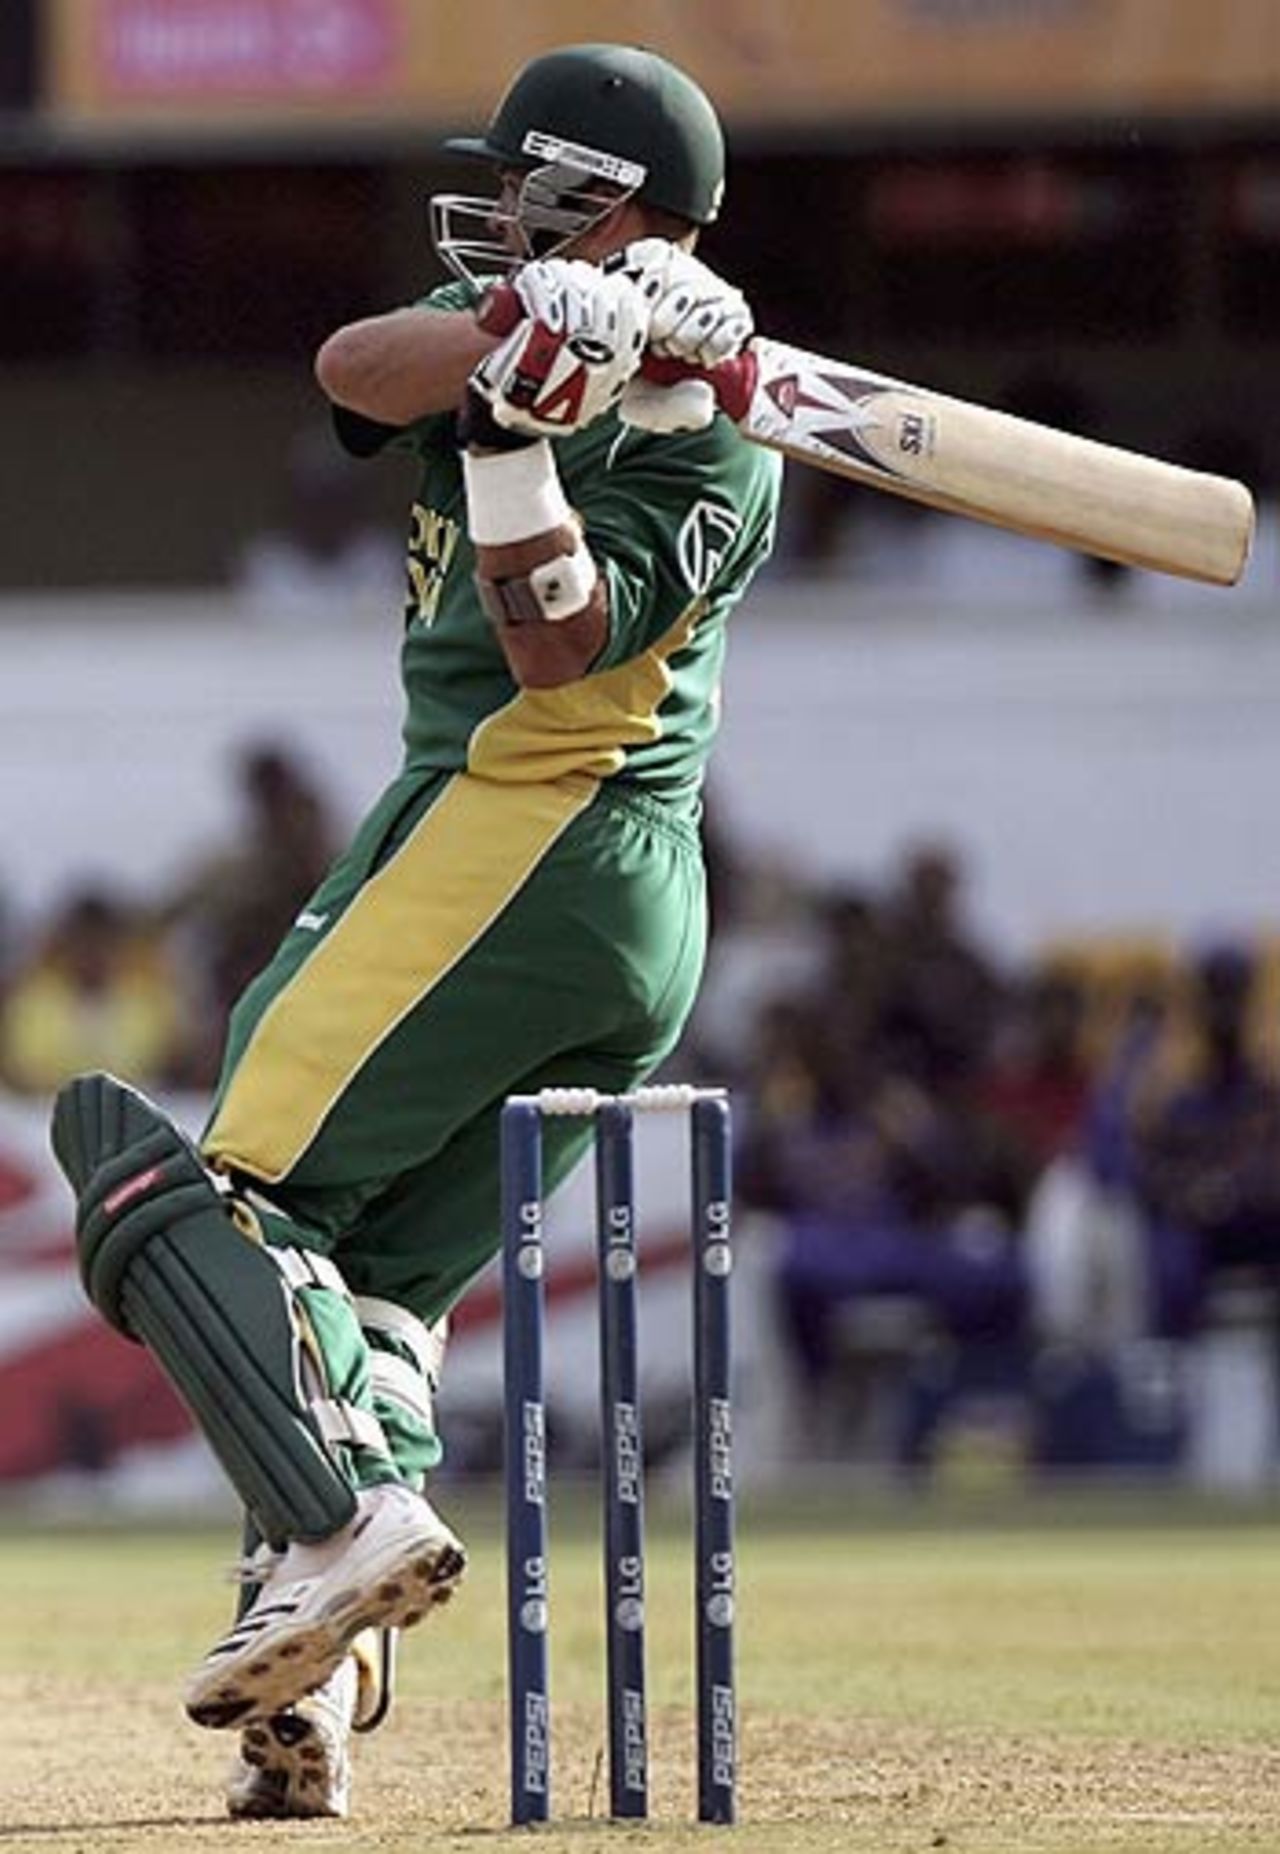 Jacques Kallis pulls en route to his 43, South Africa v Sri Lanka, 7th match, Champions Trophy, Ahmedabad, October 24, 2006